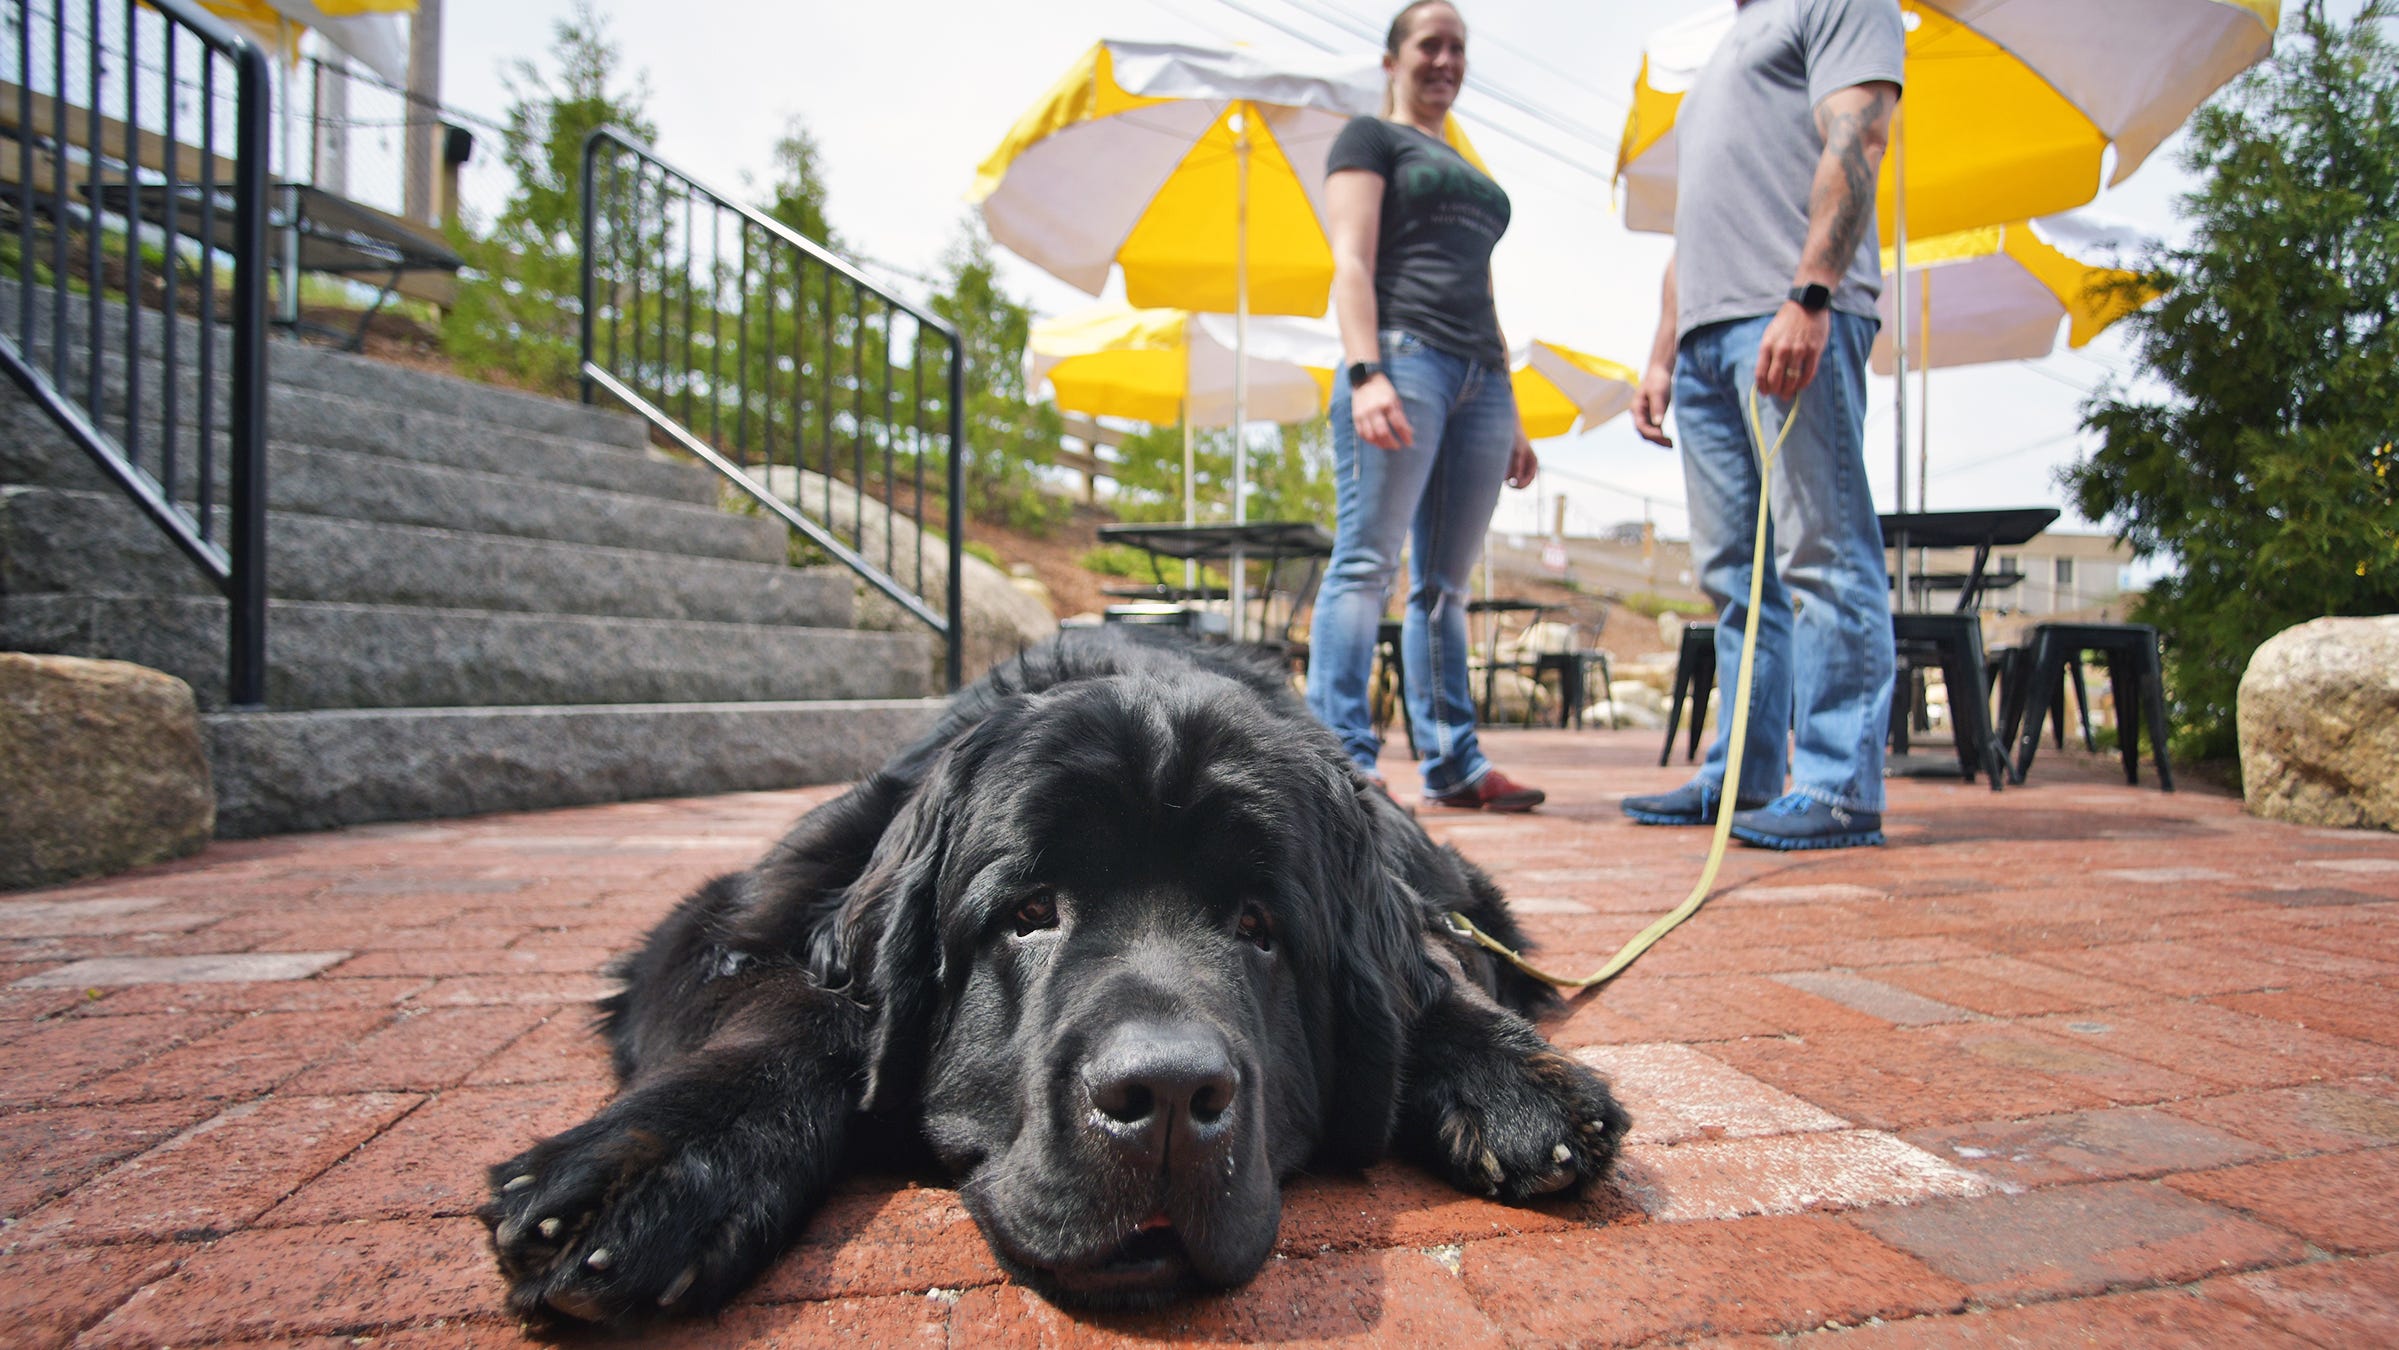 Dog-friendly Worcester restaurant and taprooms. Do you allow dogs?